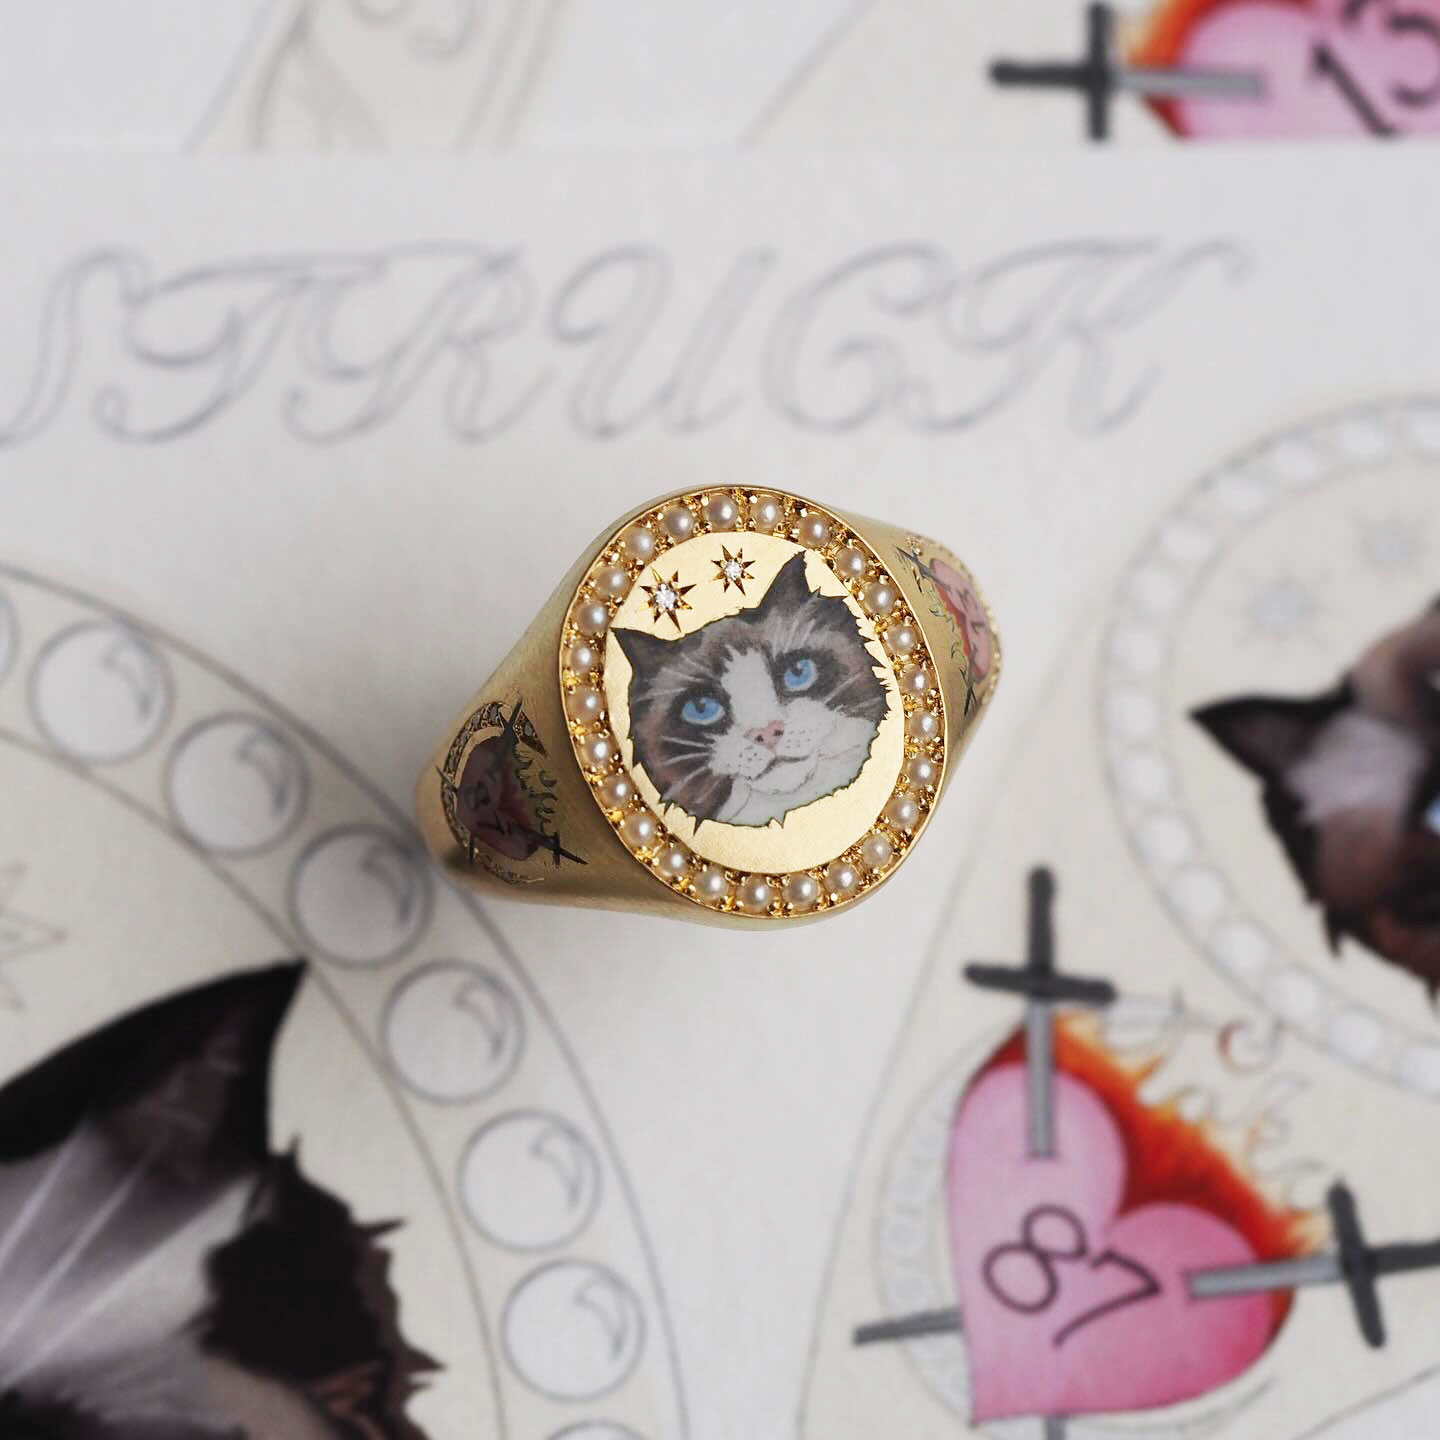 The ring includes Taylor's famous cat, Benjamin Button